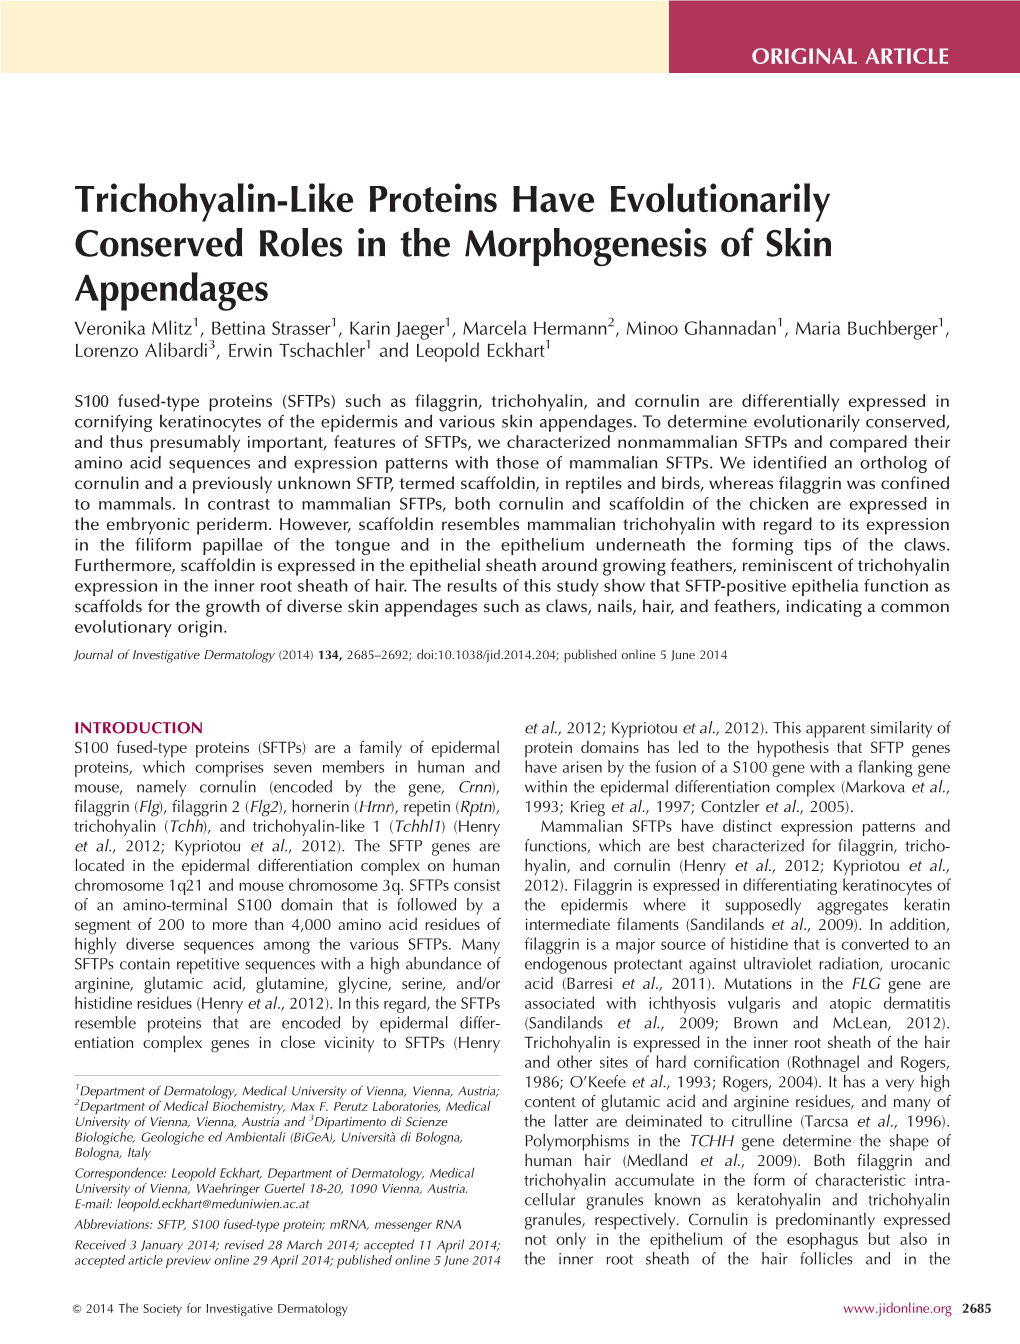 Trichohyalin-Like Proteins Have Evolutionarily Conserved Roles in the Morphogenesis of Skin Appendages